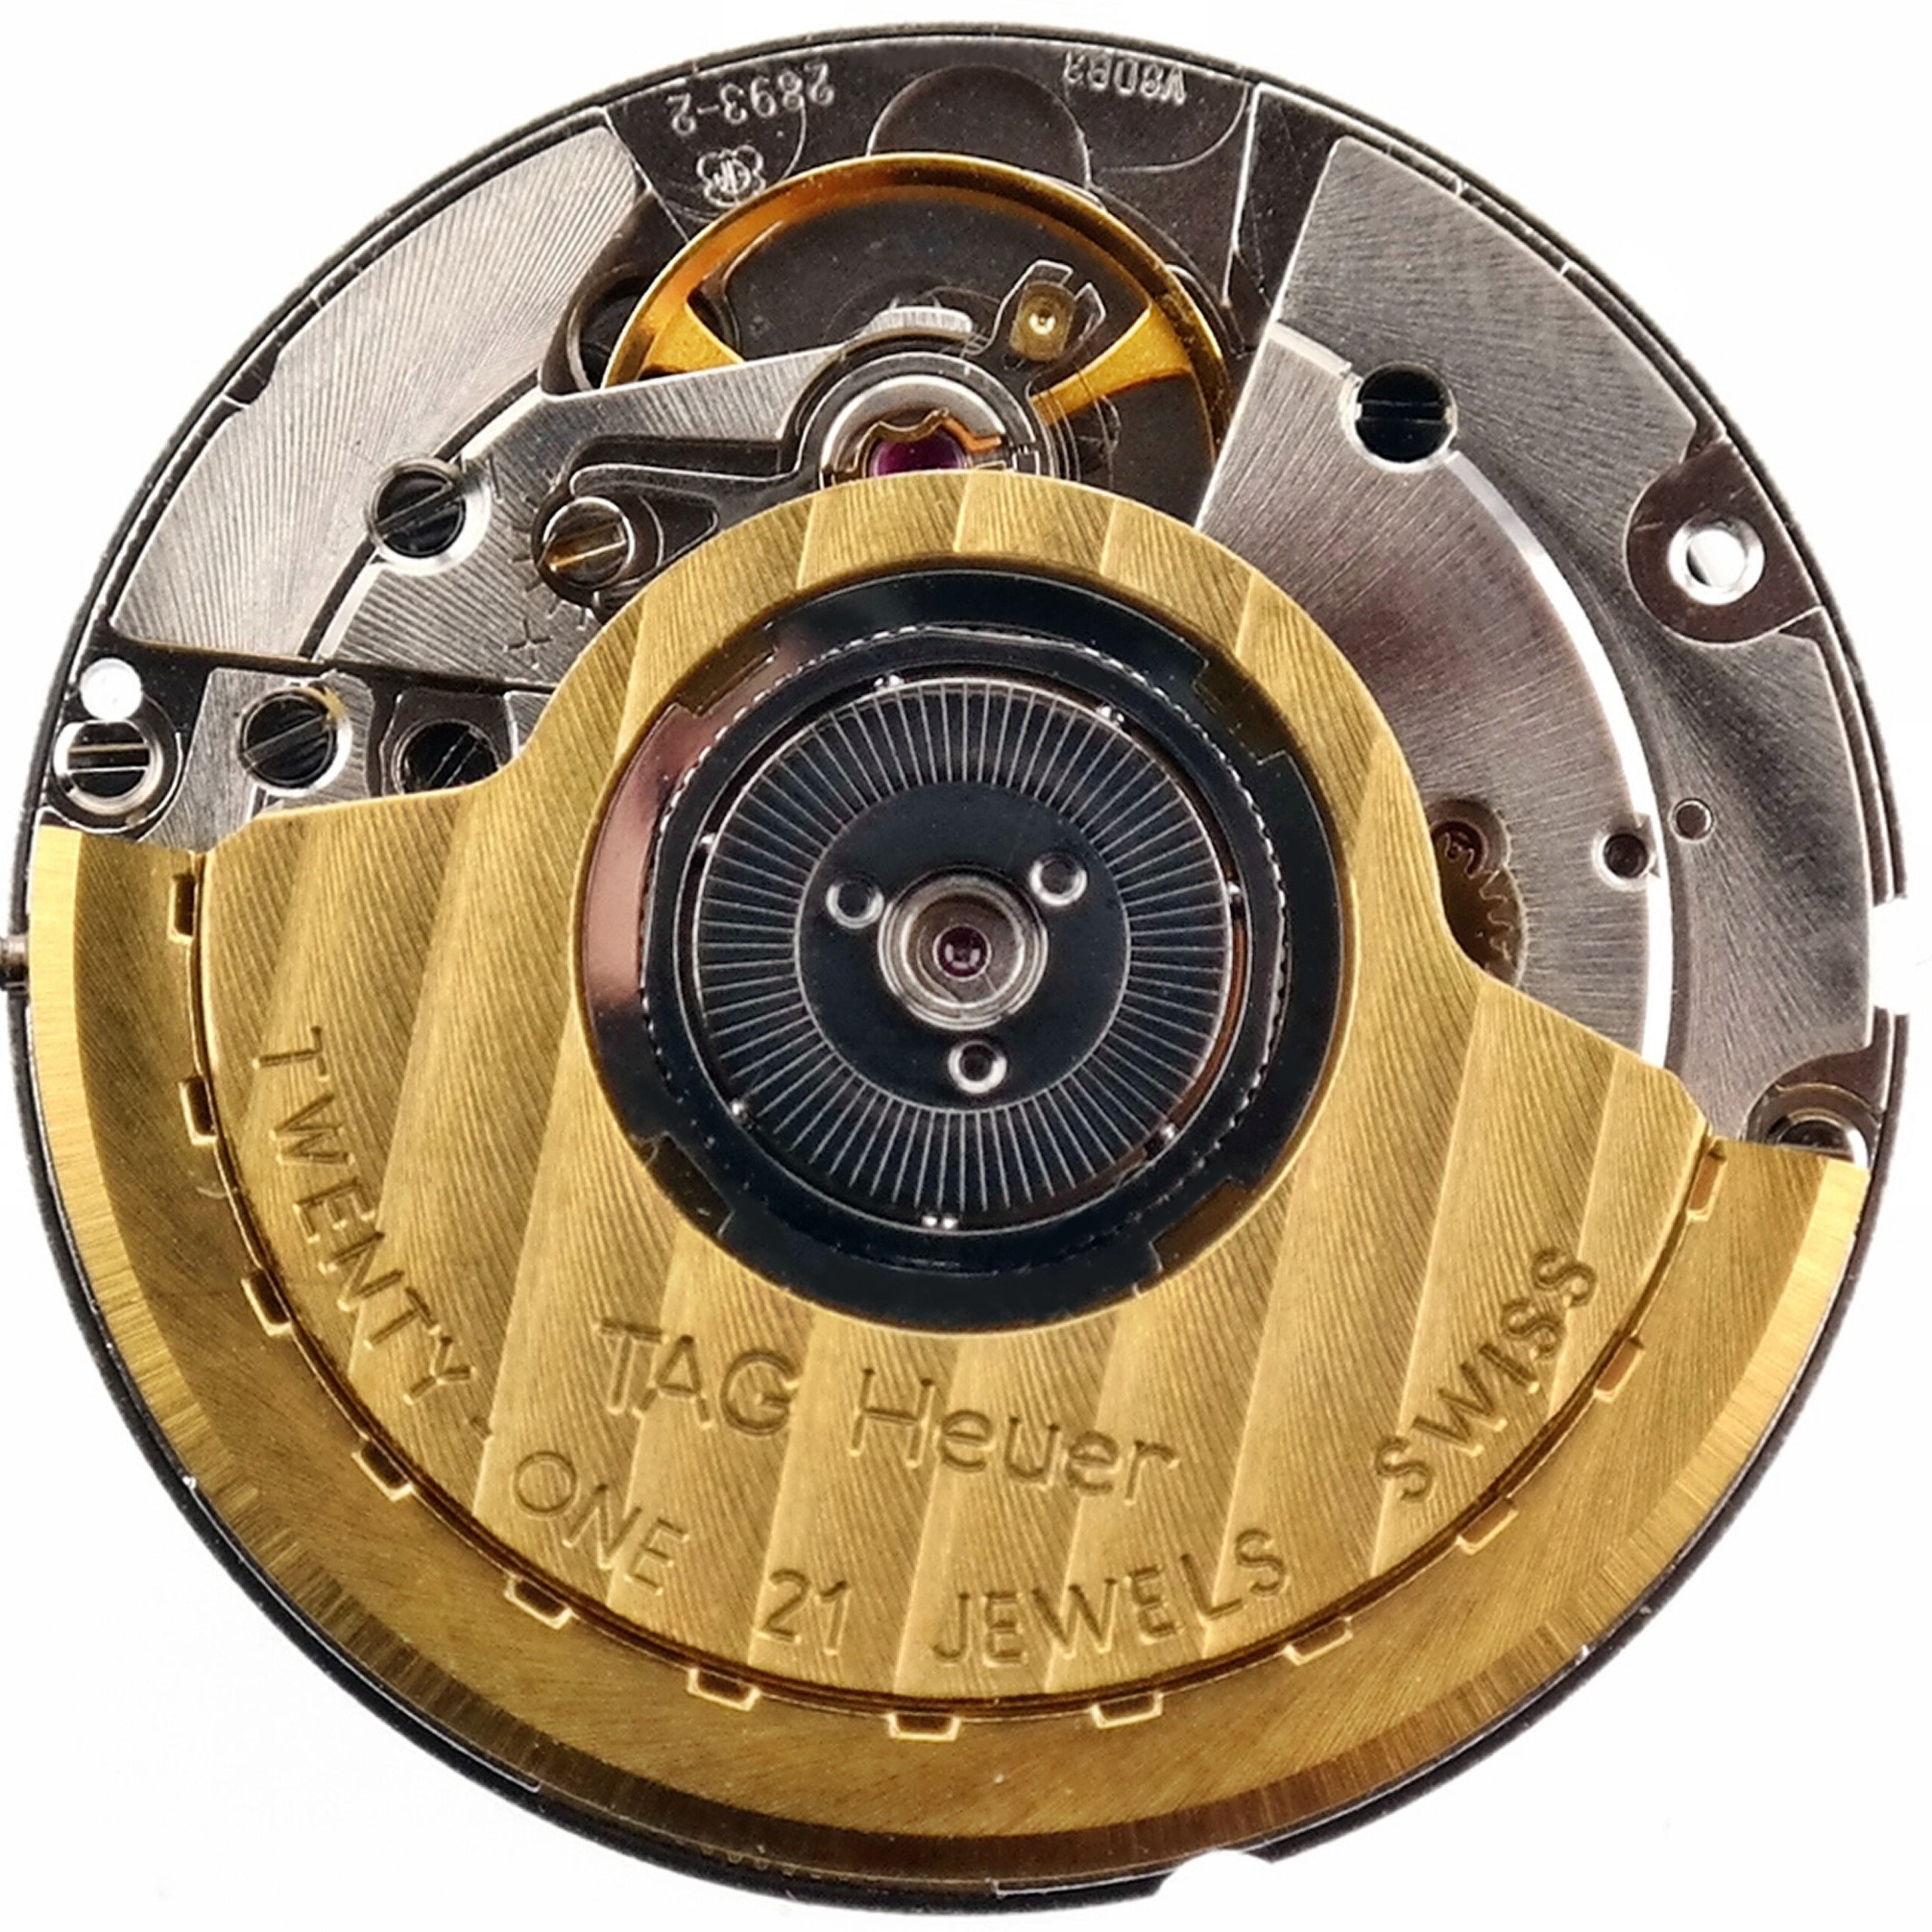 TAG Heuer - ETA 2893-2 (Calibre 7 Twint Time) - Automatic Watch Movement